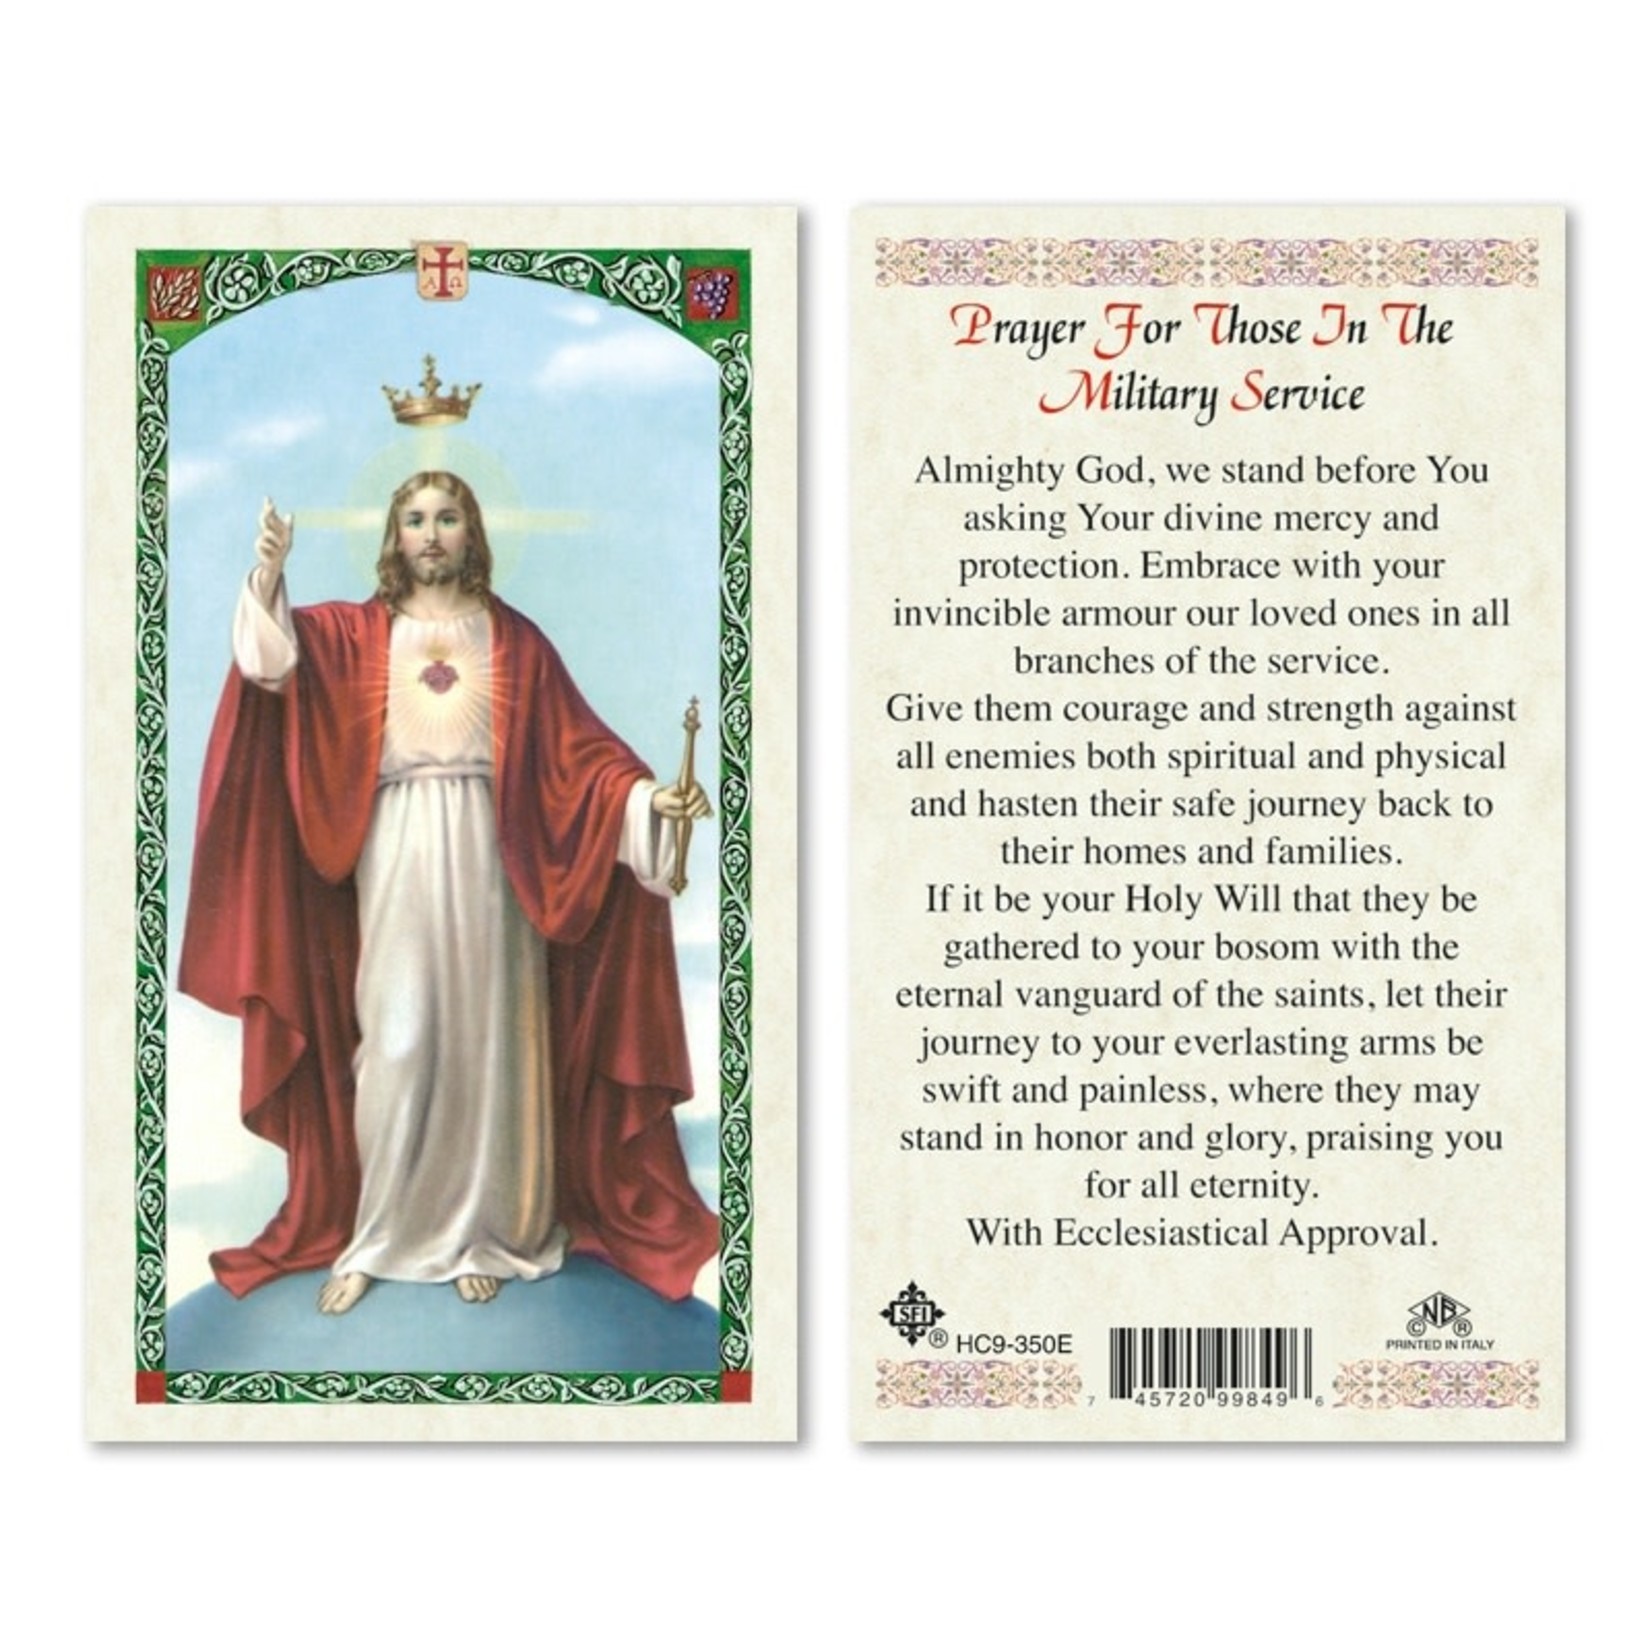 Prayer Card For Those in the Military Service